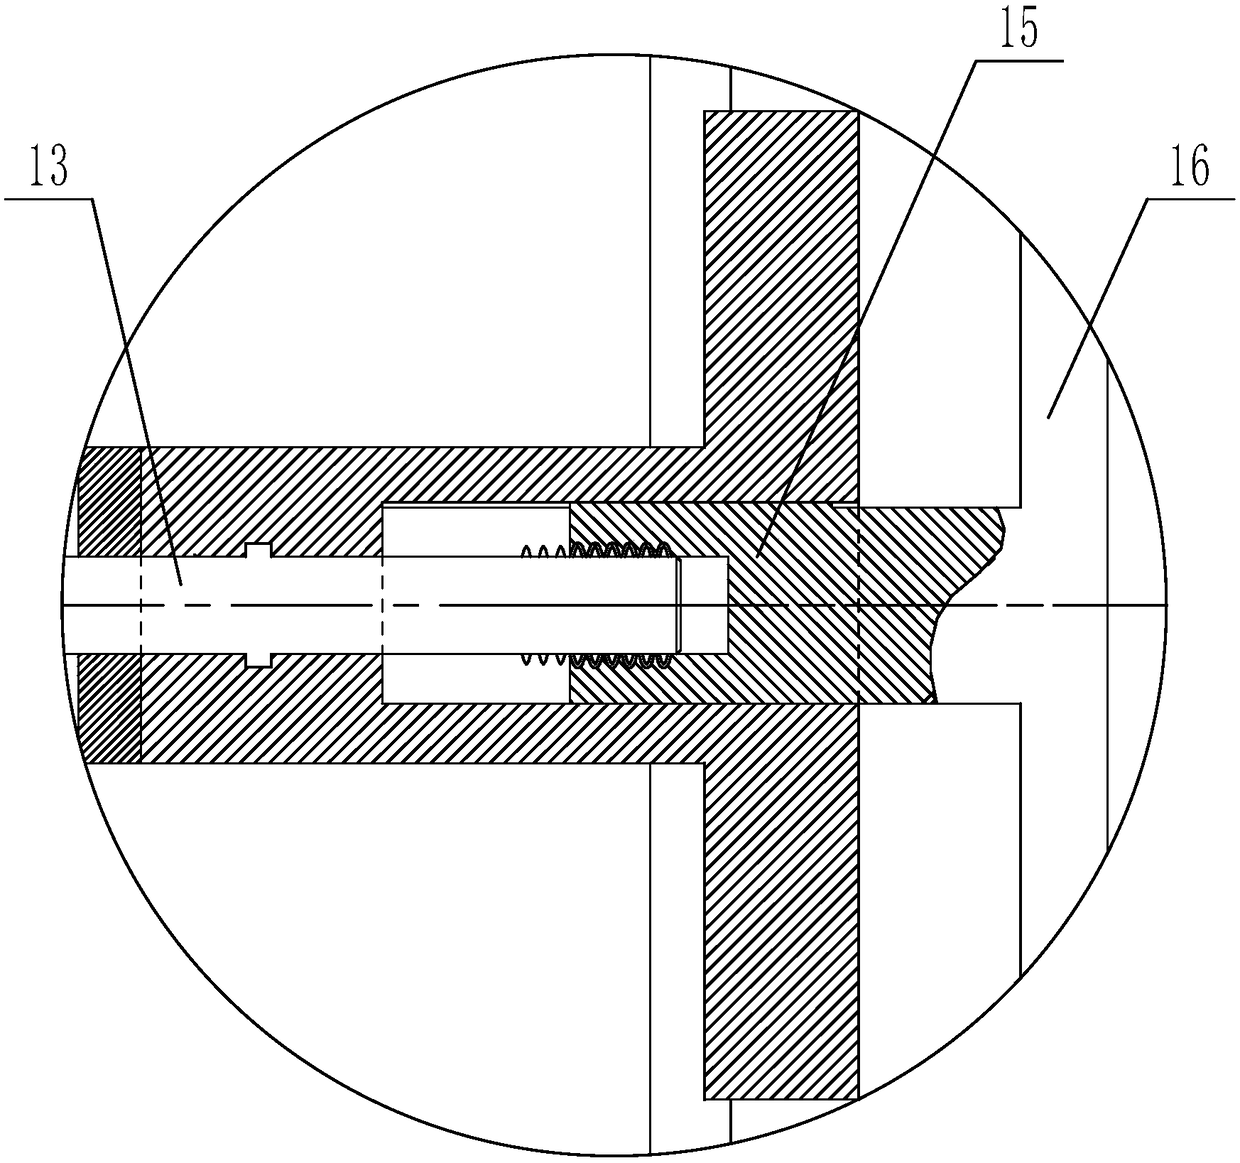 A feeding structure for steel pipe flaw detection